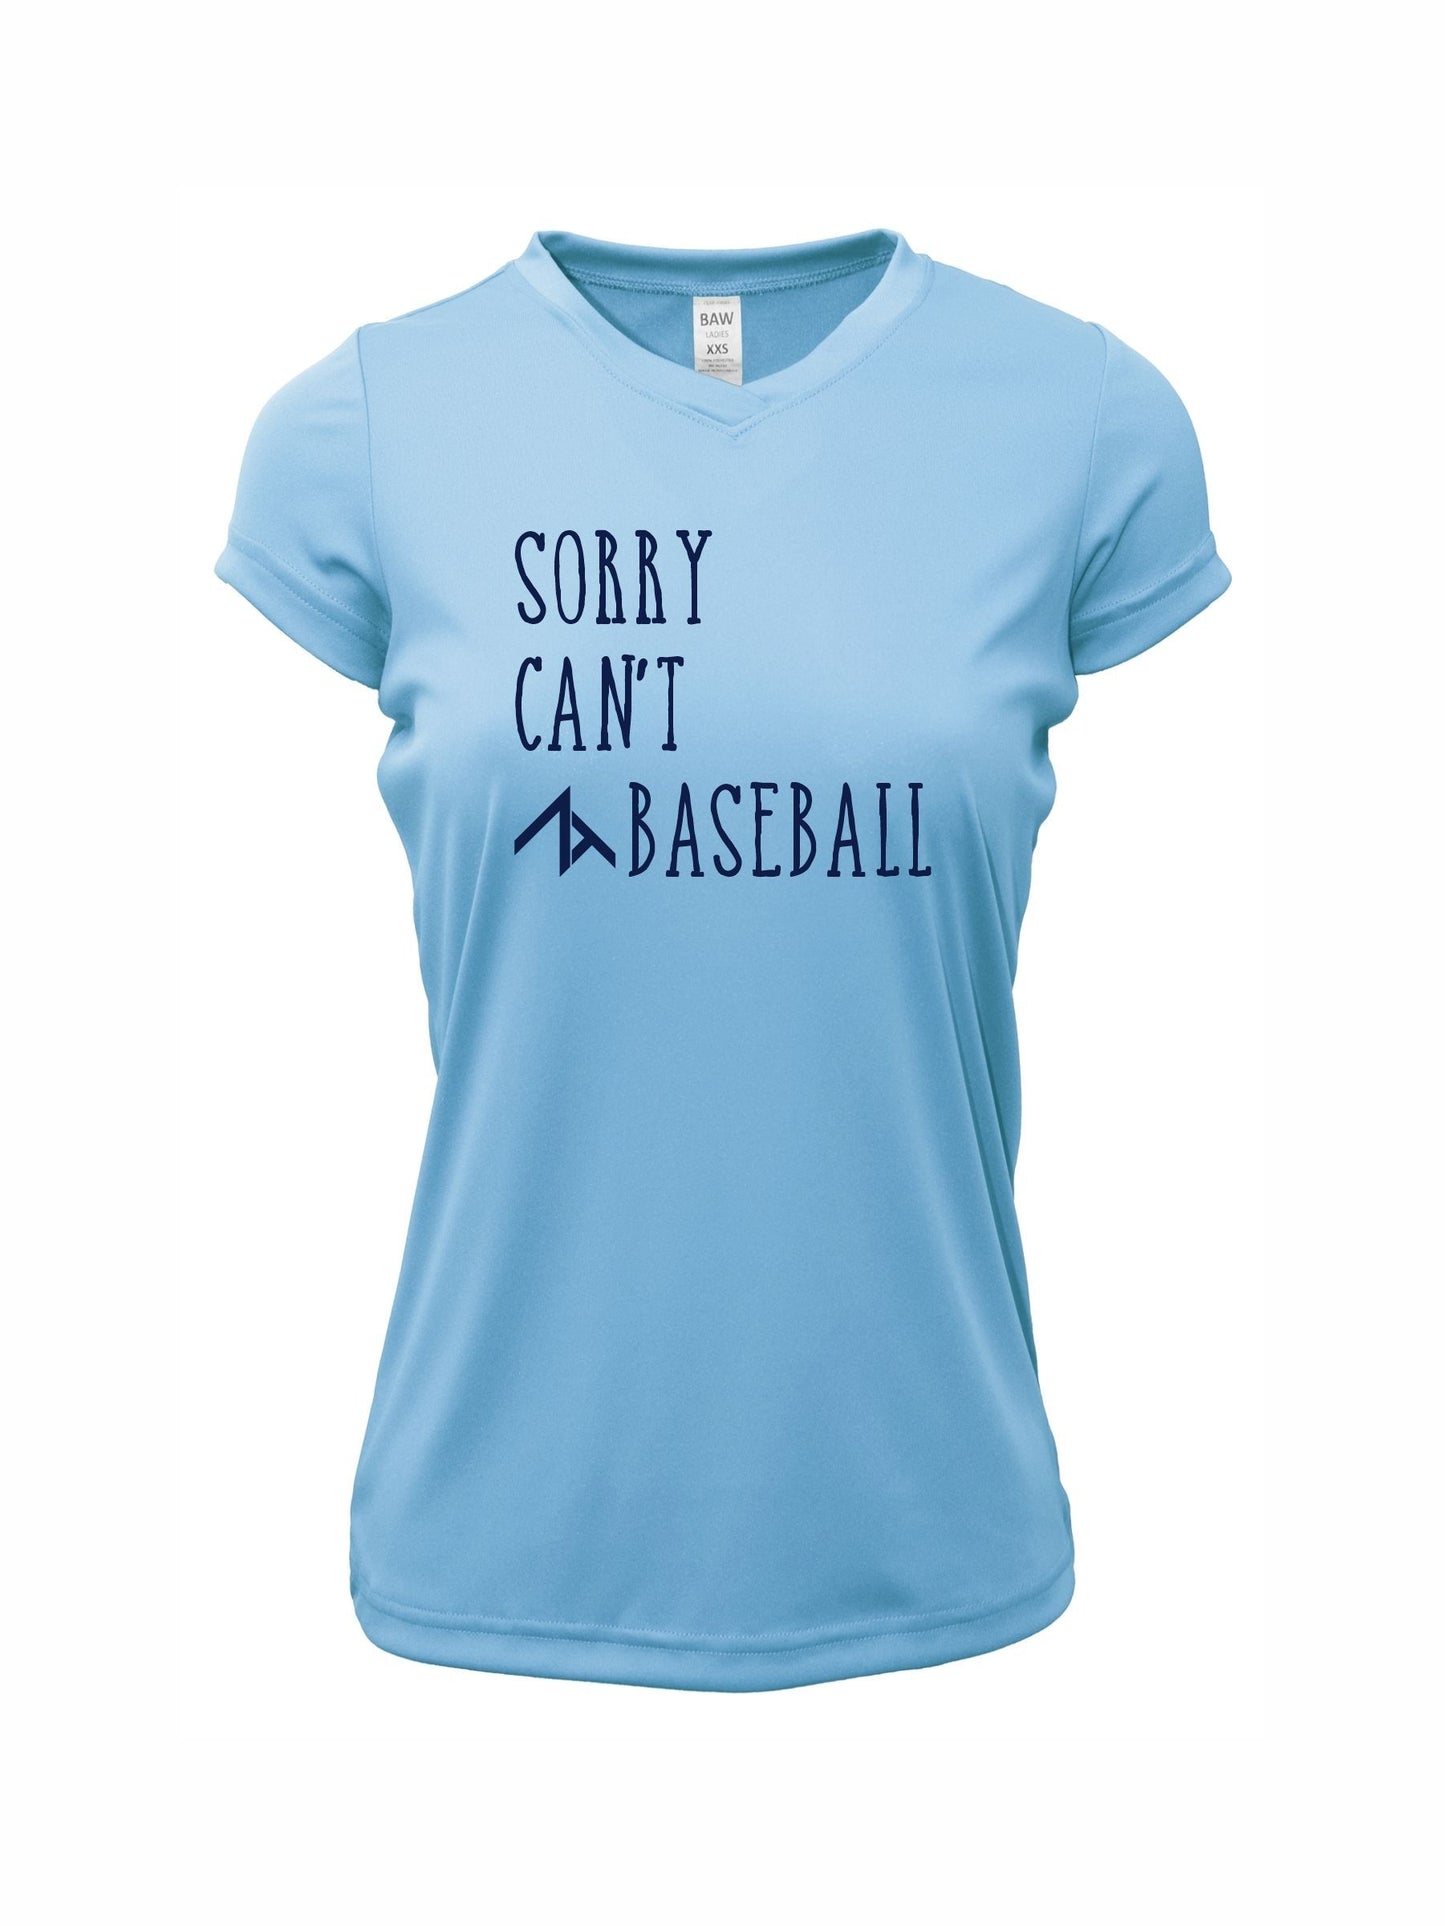 V-Neck Short Sleeve "SORRY CAN'T" Cotton T-shirt